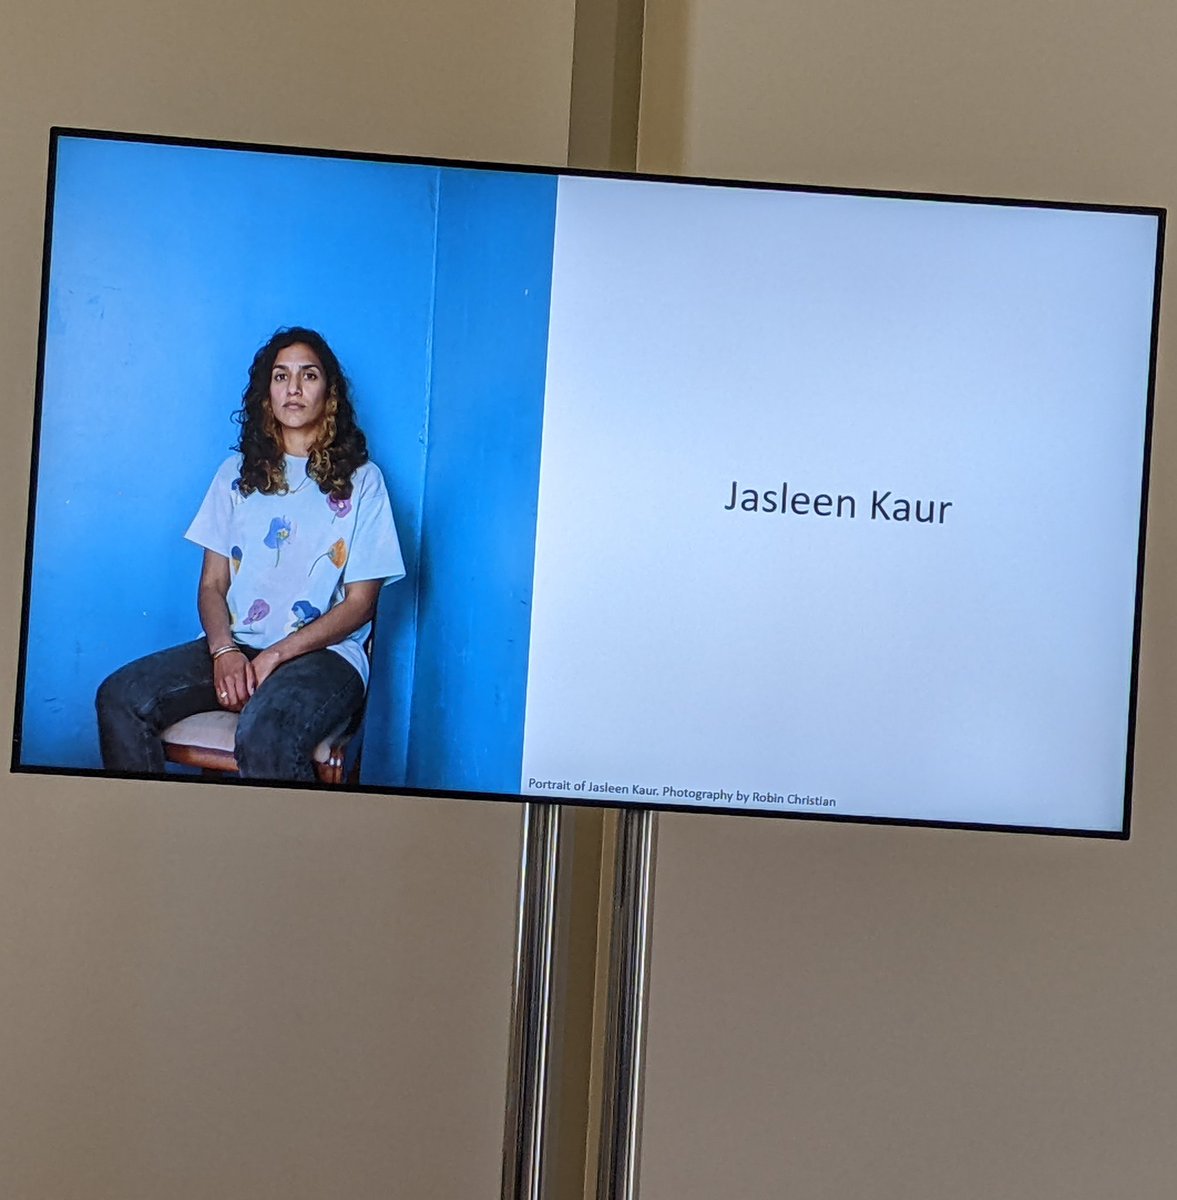 Congrats to Jasleen Kaur - one of four nominated for Britain's top art prize #TurnerPrize Other artists: Pio Abad, Claudette Johnson, and Delaine Le Bas. JK #Glasgow born, solo show 'Alter Alter' Tramway, Glasgow (March - October 2023) Live @Tate Turner 40 #JasleenKaur Sept show